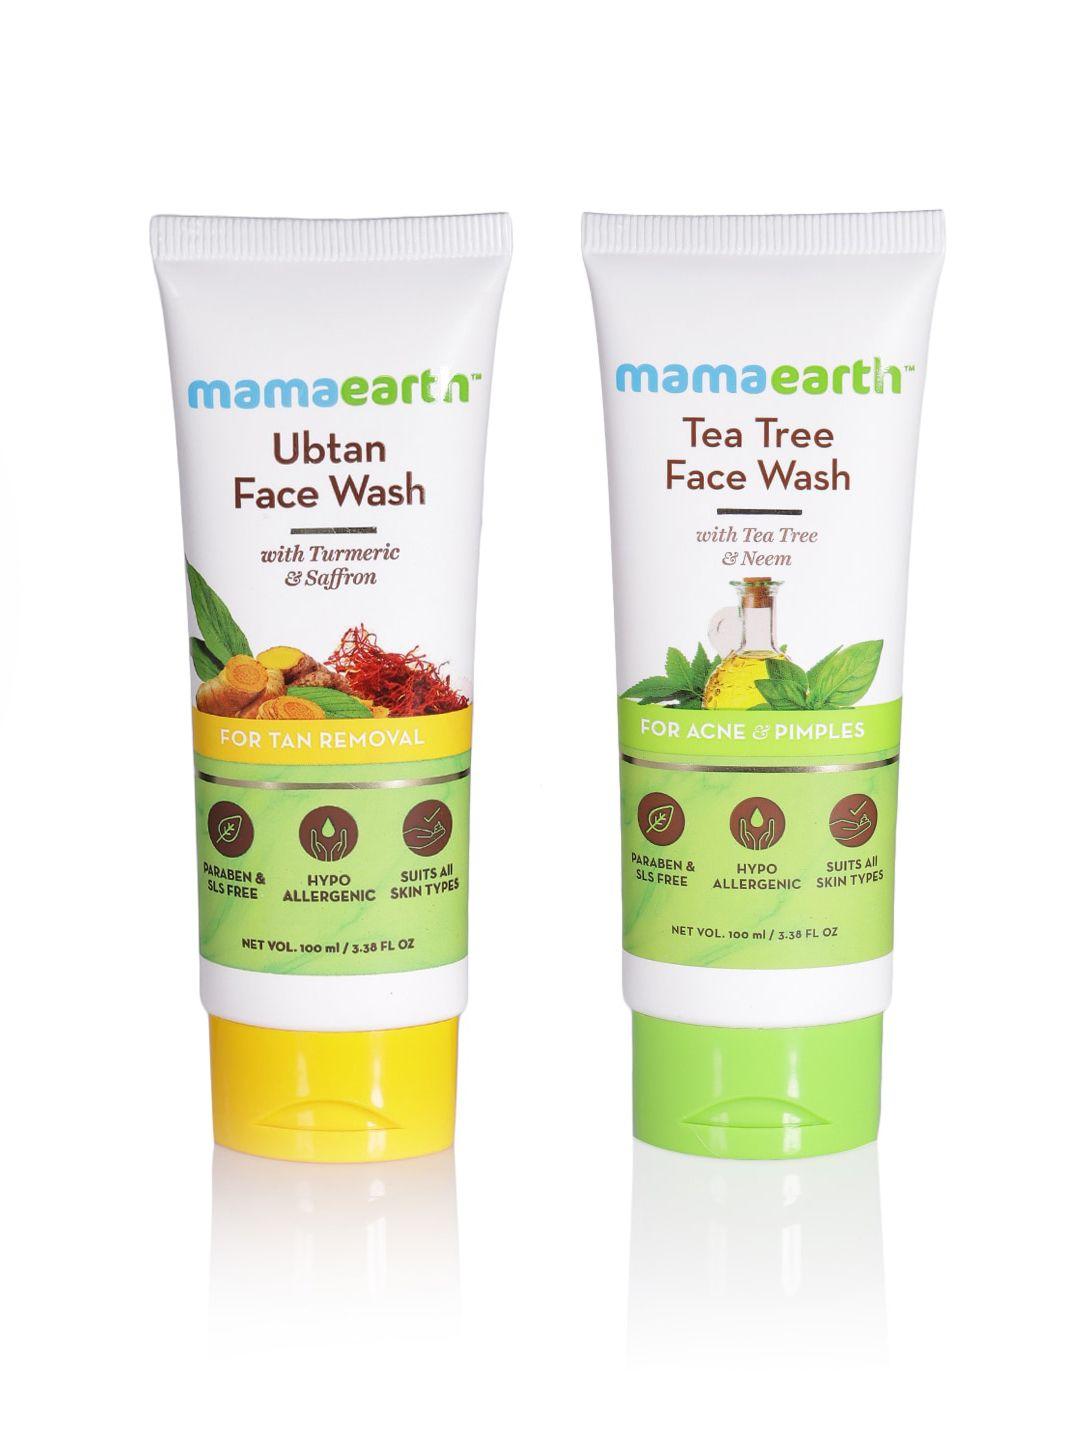 mamaearth-set-of-sustainable-ubtan-tan-removal-face-wash-&-tea-tree-face-wash